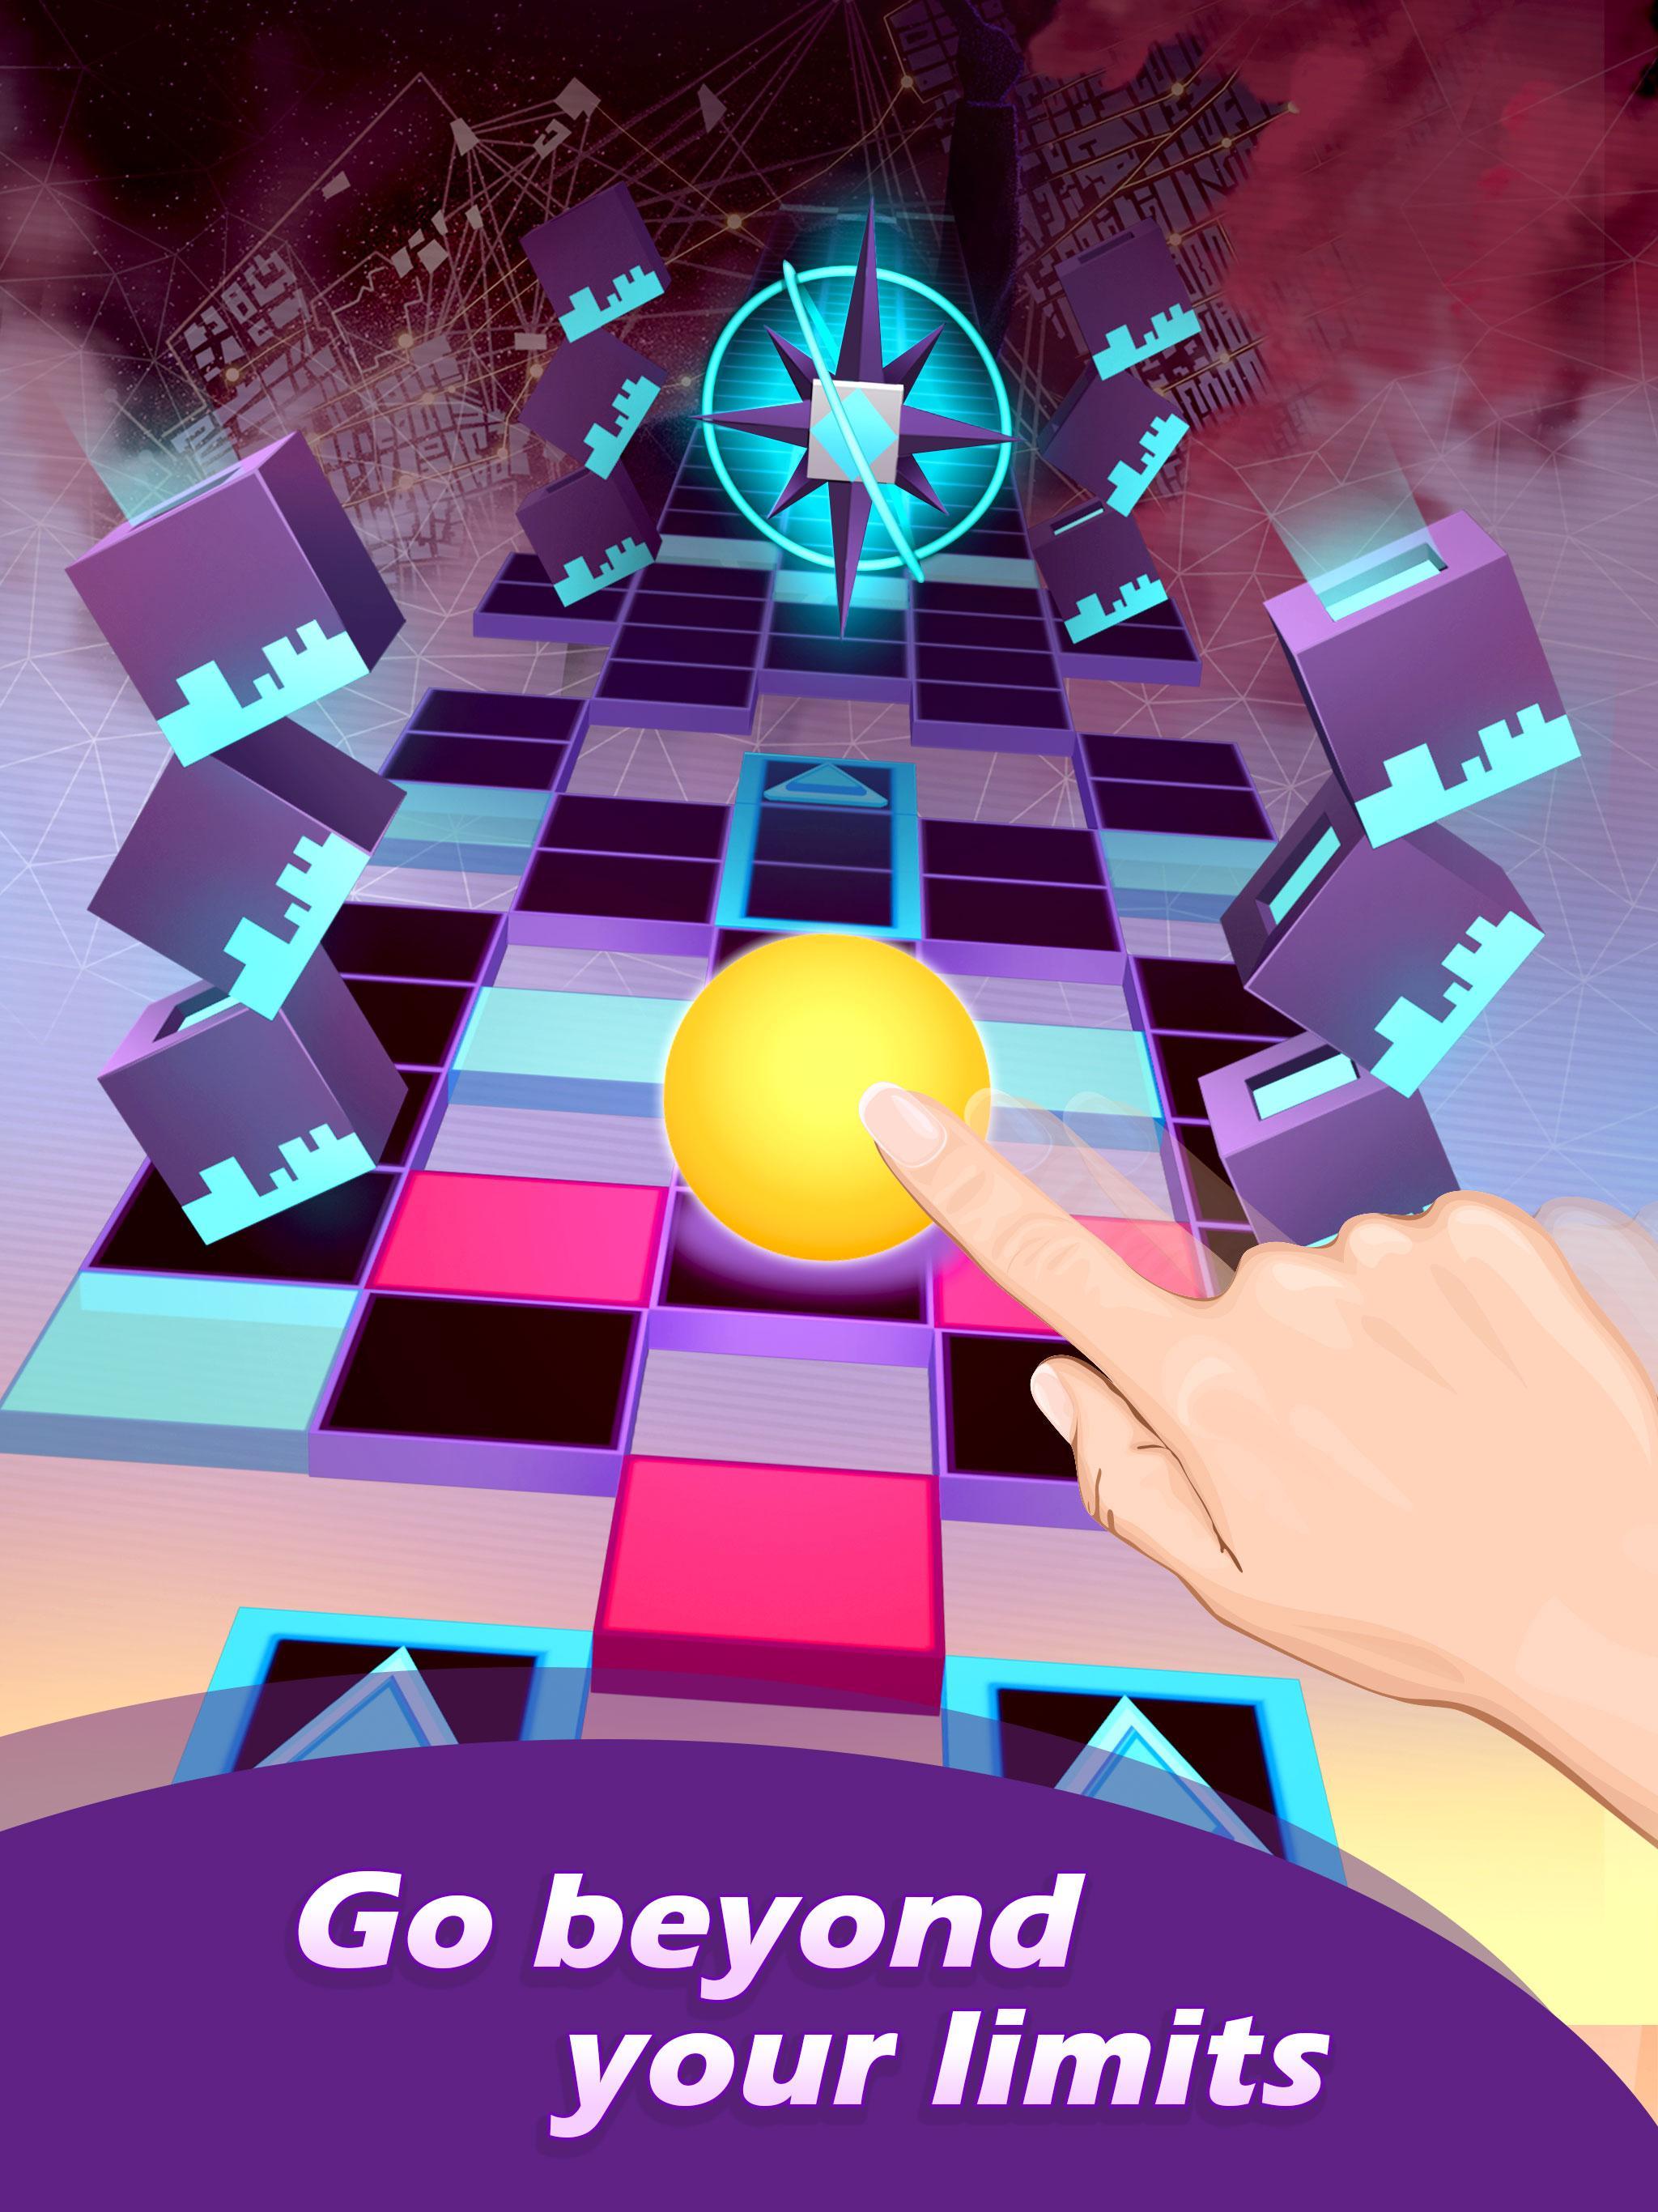 Rolling sky download for android